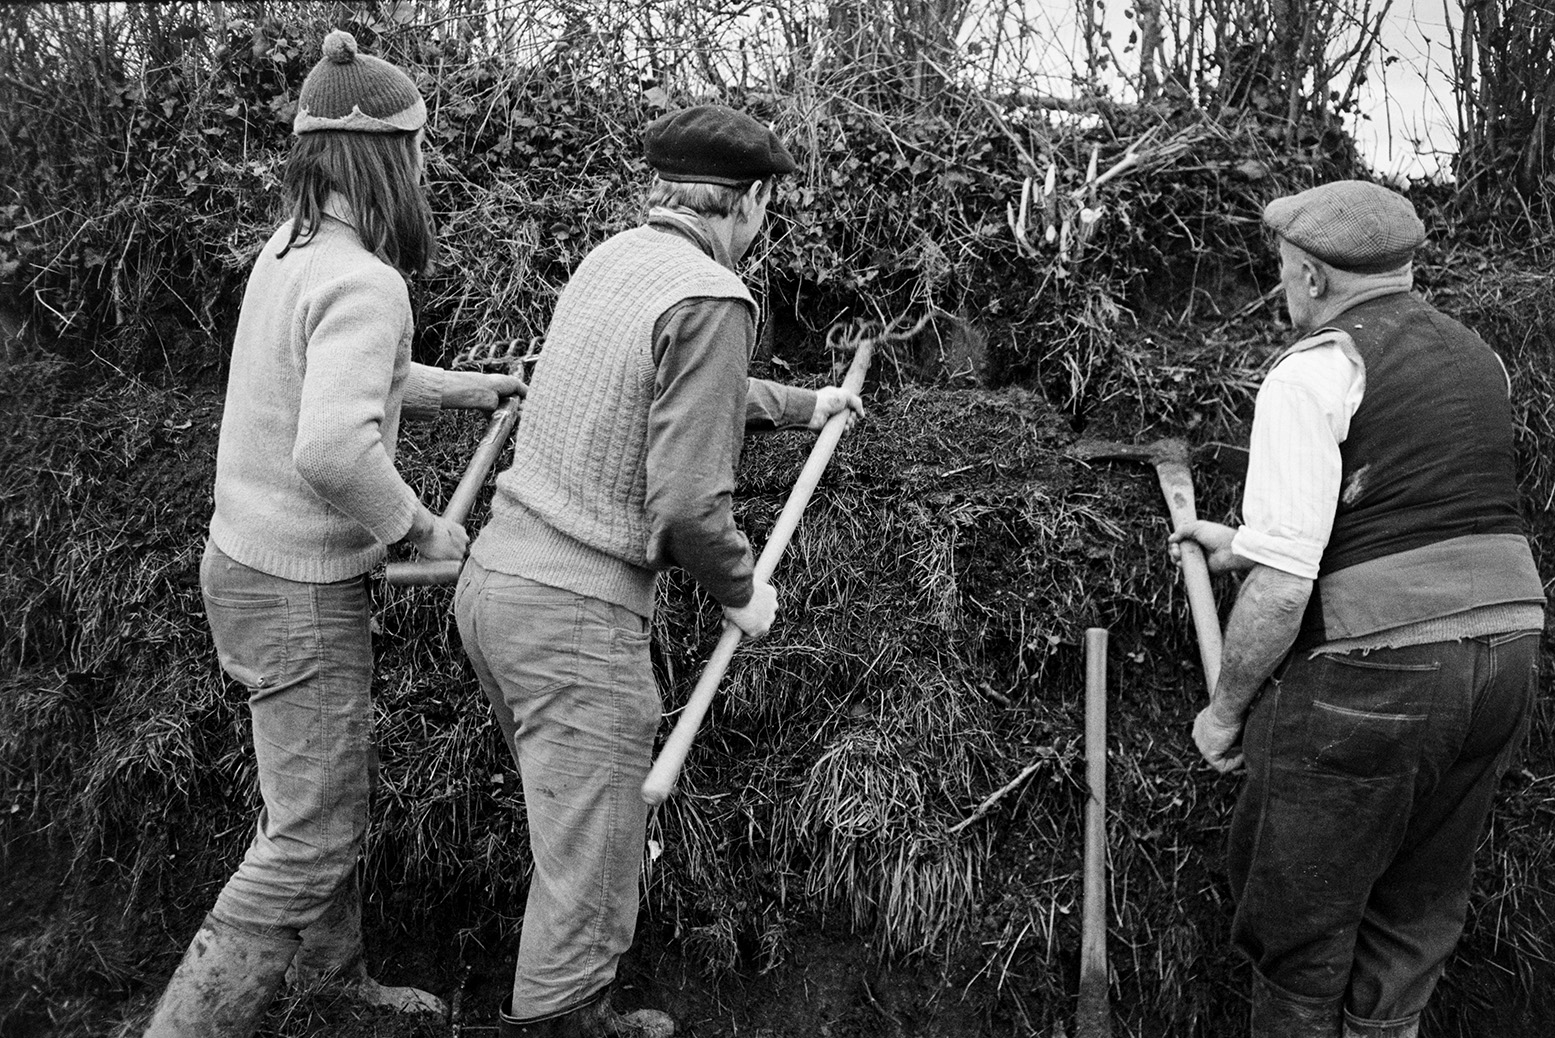 Derek Bright, Ivor Bourne and Tom Hooper (left to right) clatting, building up the hedgebank with squares of turf, in a field at Mill Road Farm, Beaford. They are using forks and axes. The farm was also known as Jeffrys.